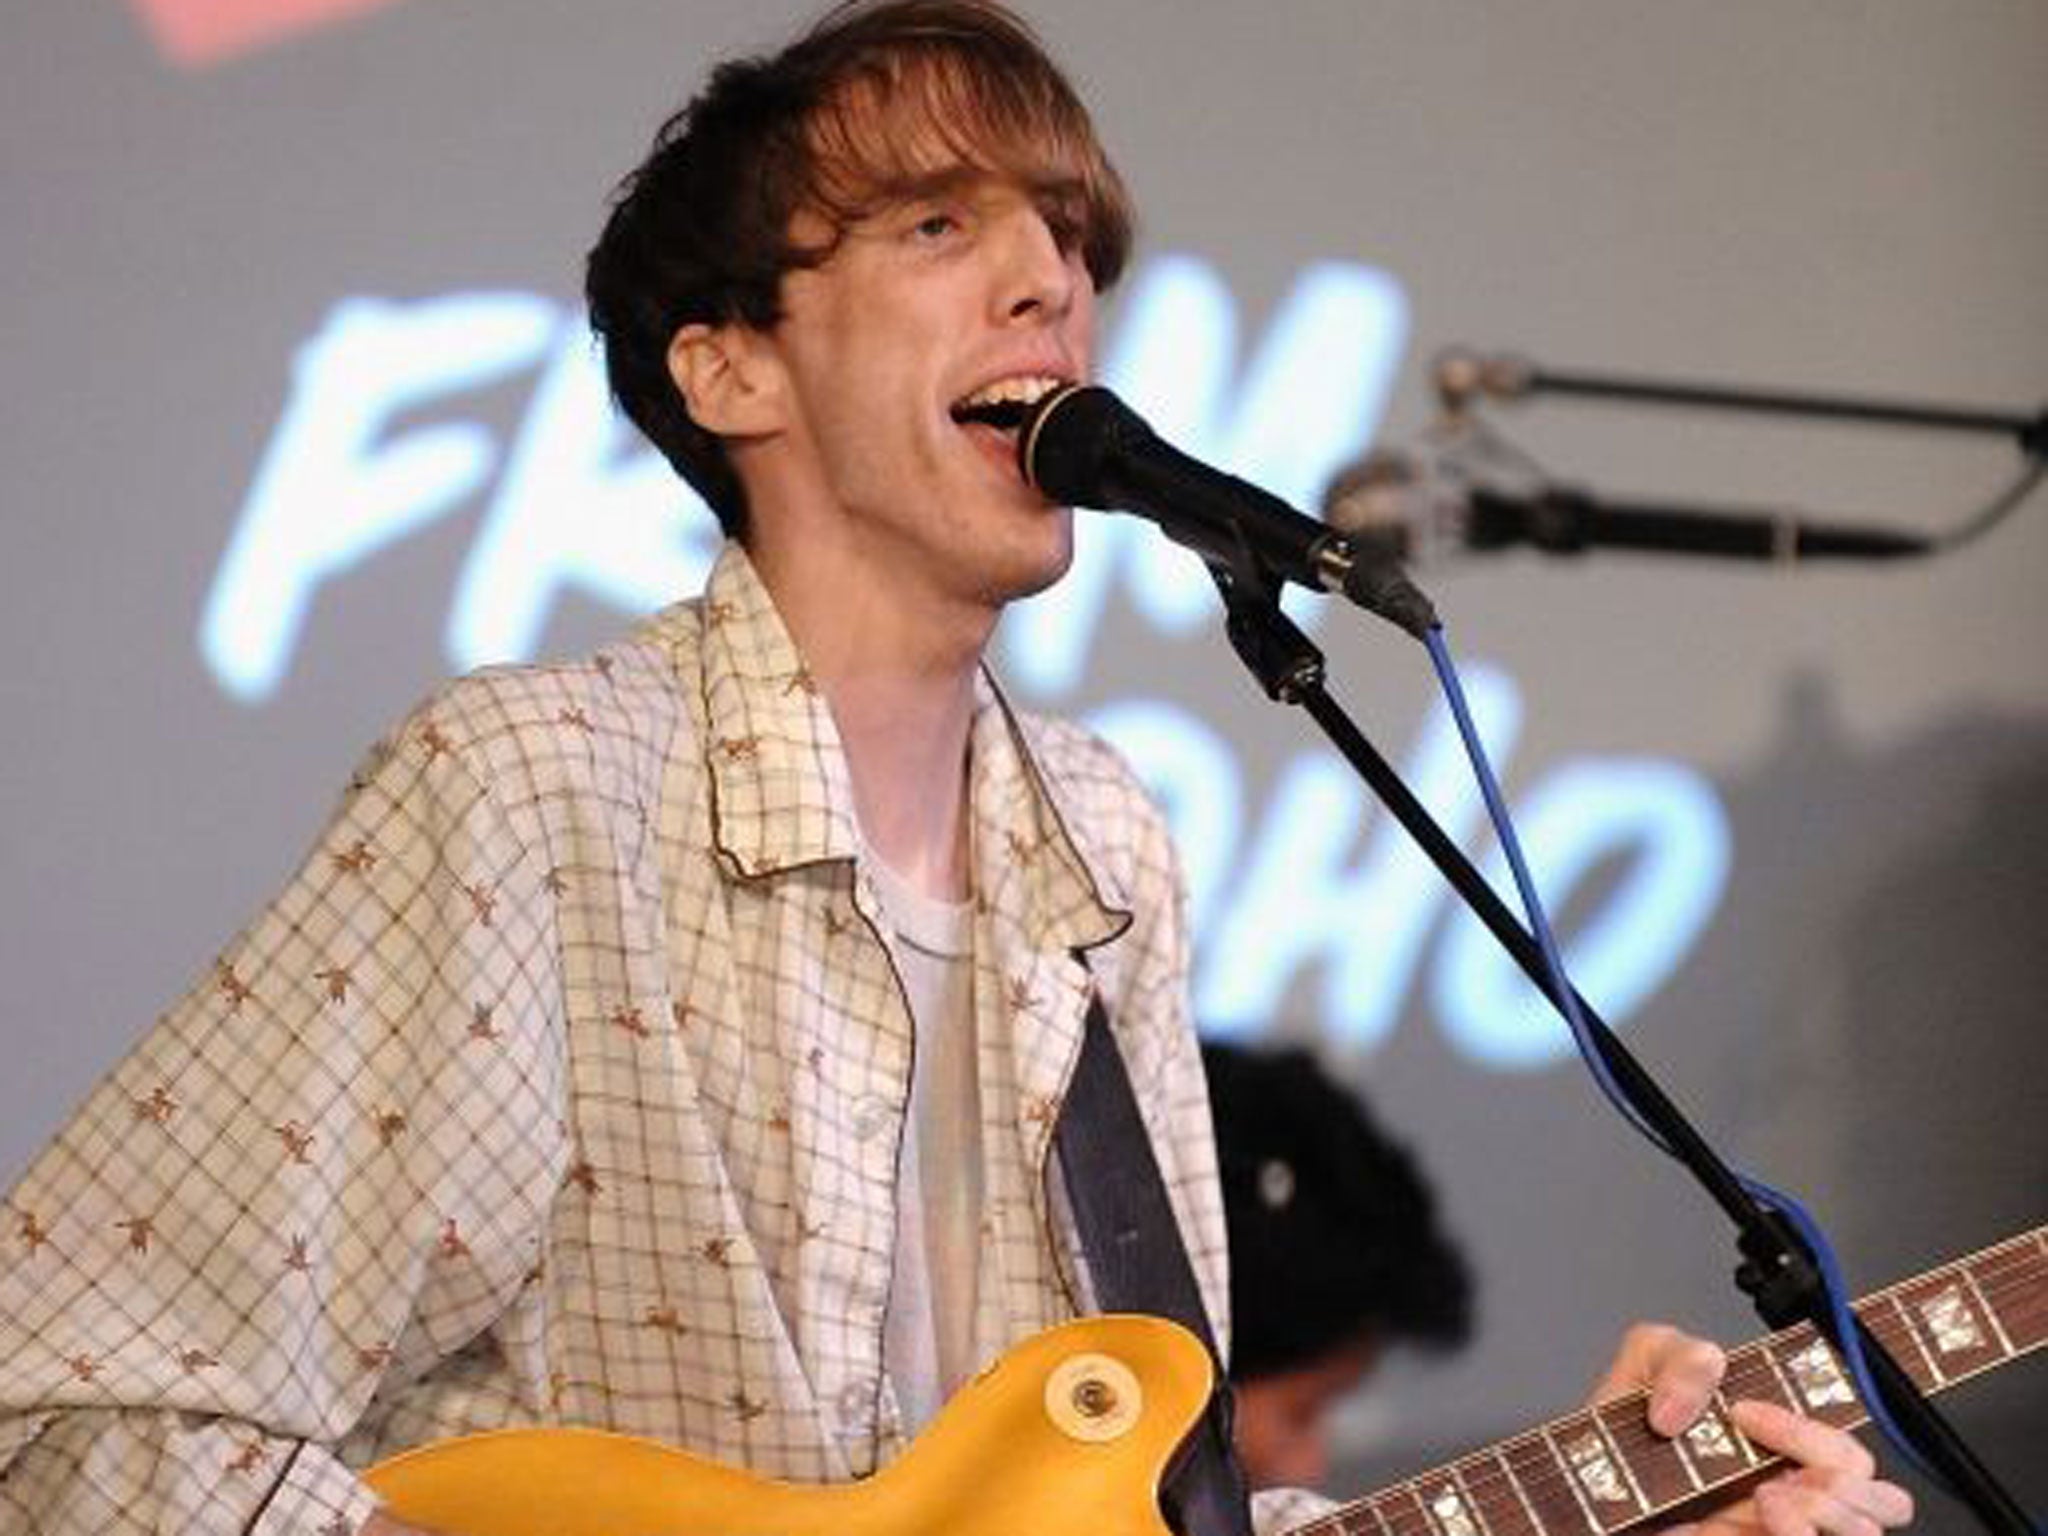 Deerhunter have returned with their first album since 2010